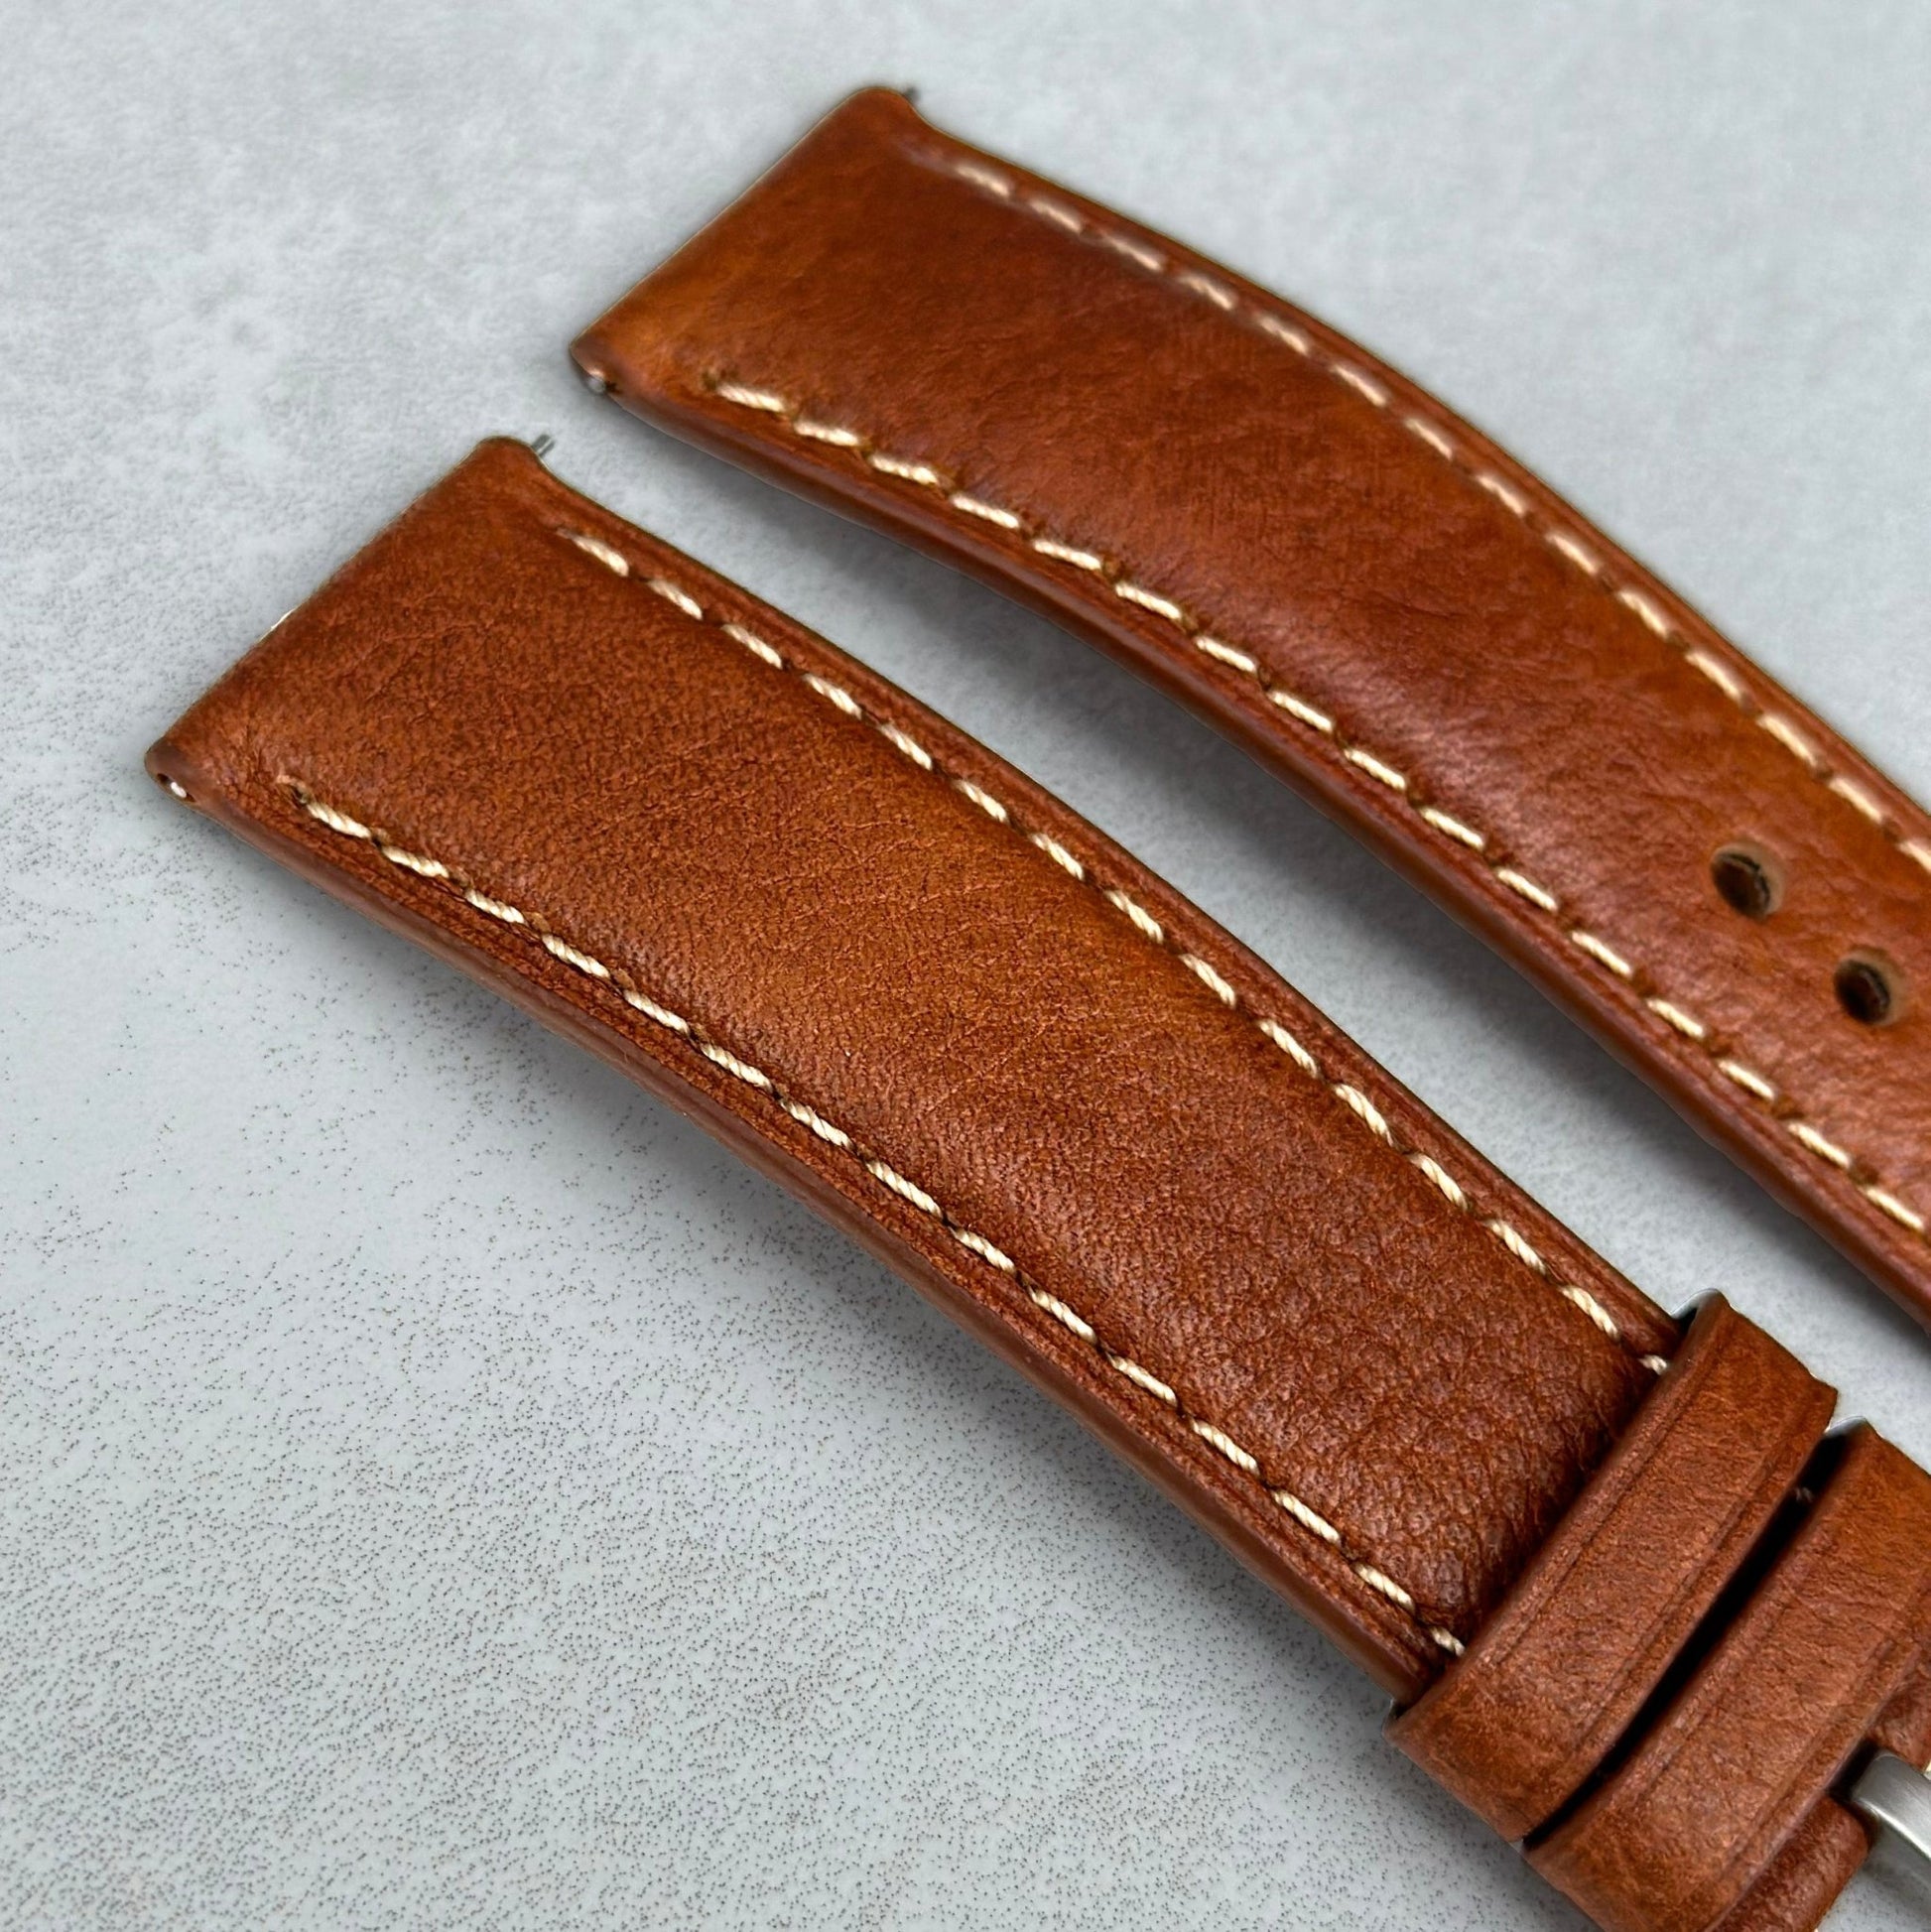 Top of the Rome copper tan Italian leather watch strap. Full Grain leather. Padded leather strap. Watch And Strap